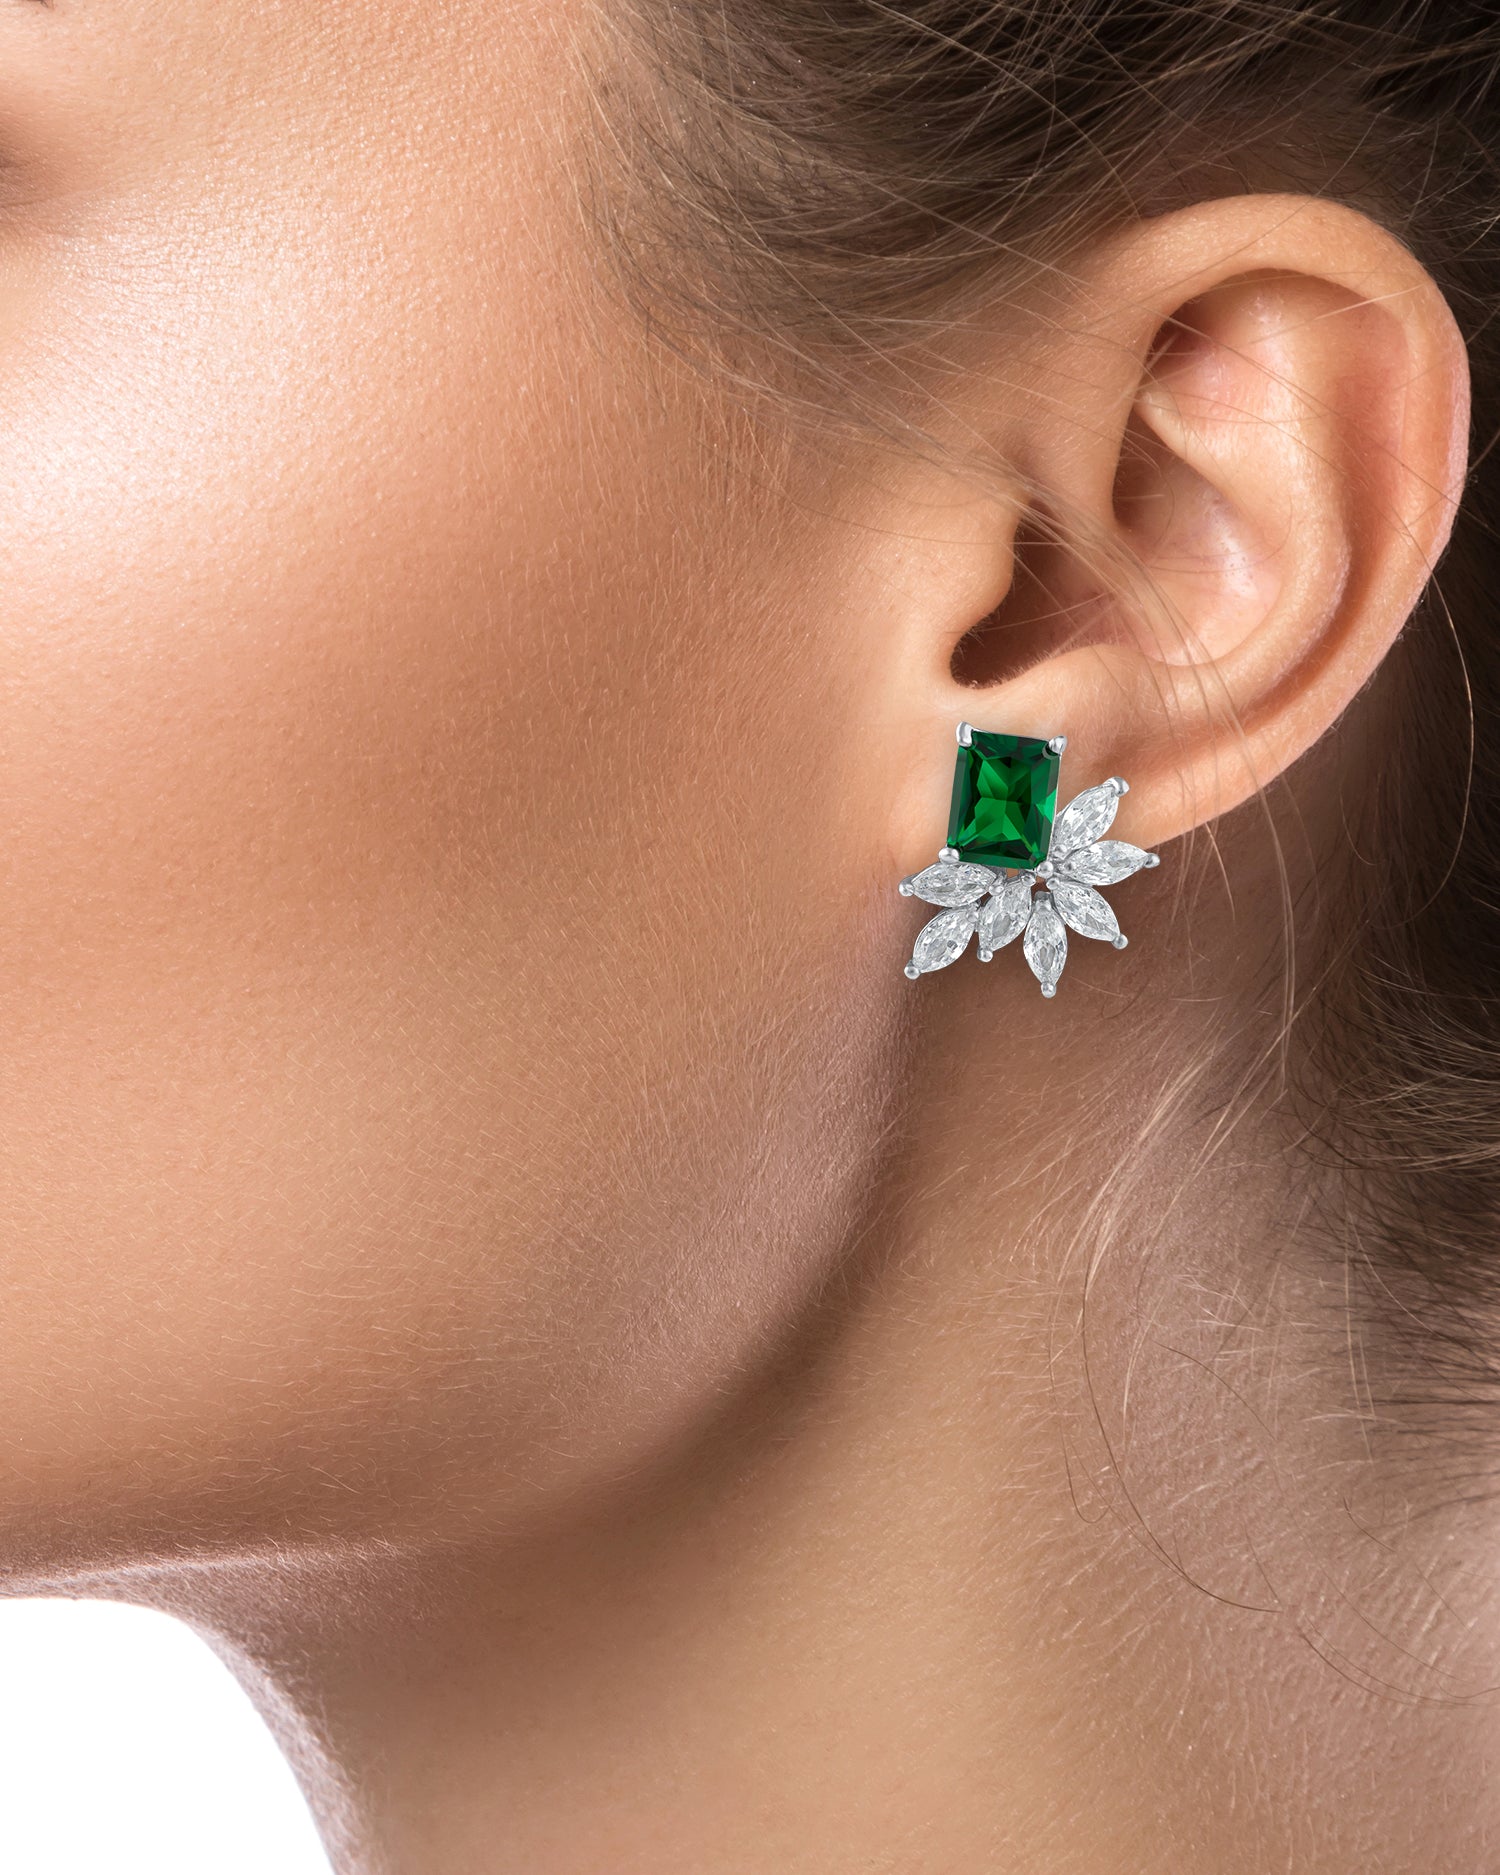 Emerald and Marquis CZ Studs